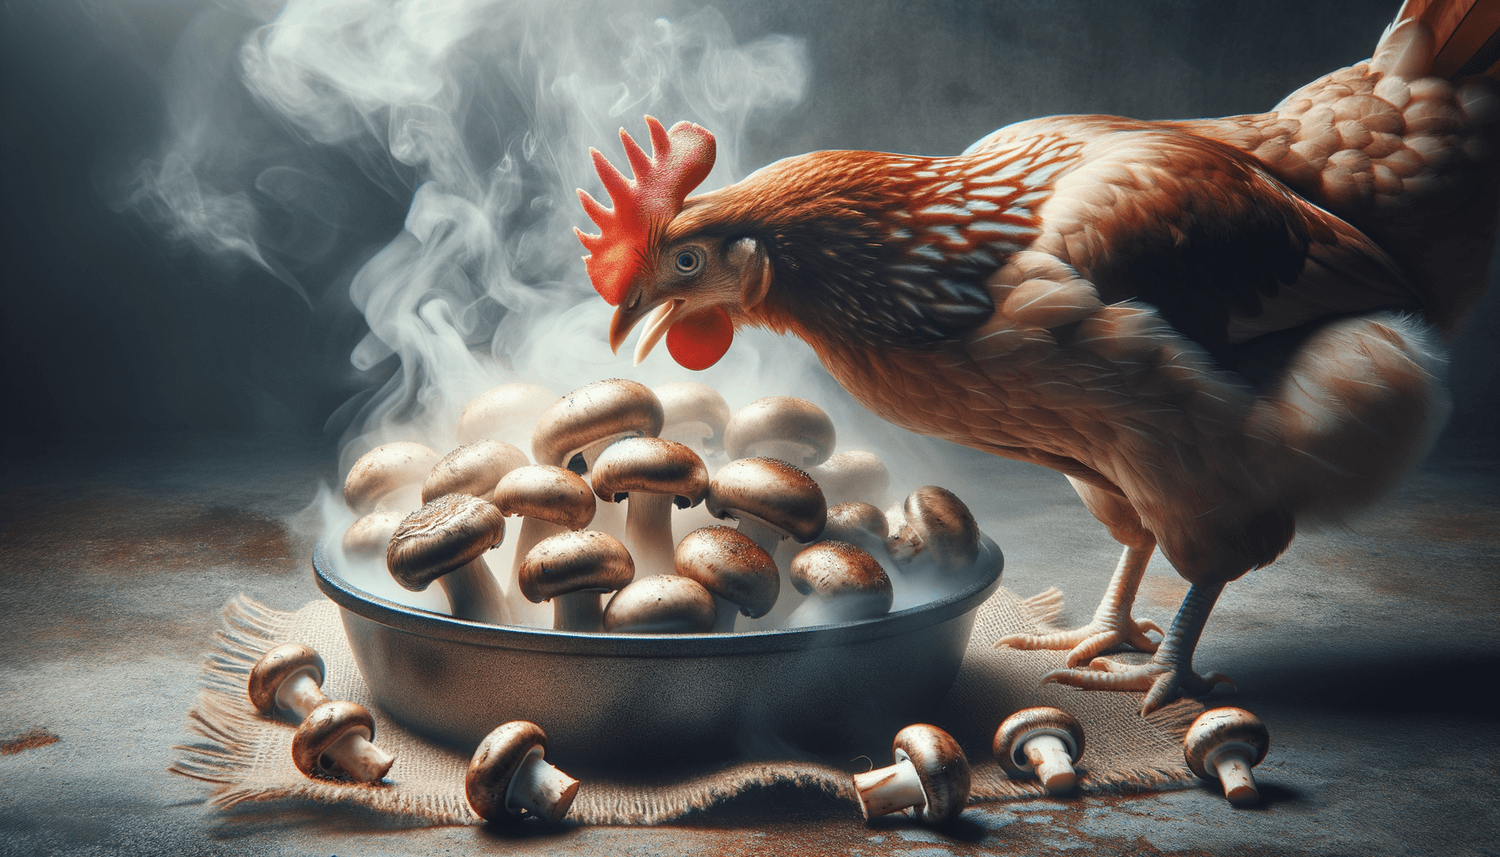 Can Chickens Eat Cooked Mushrooms?